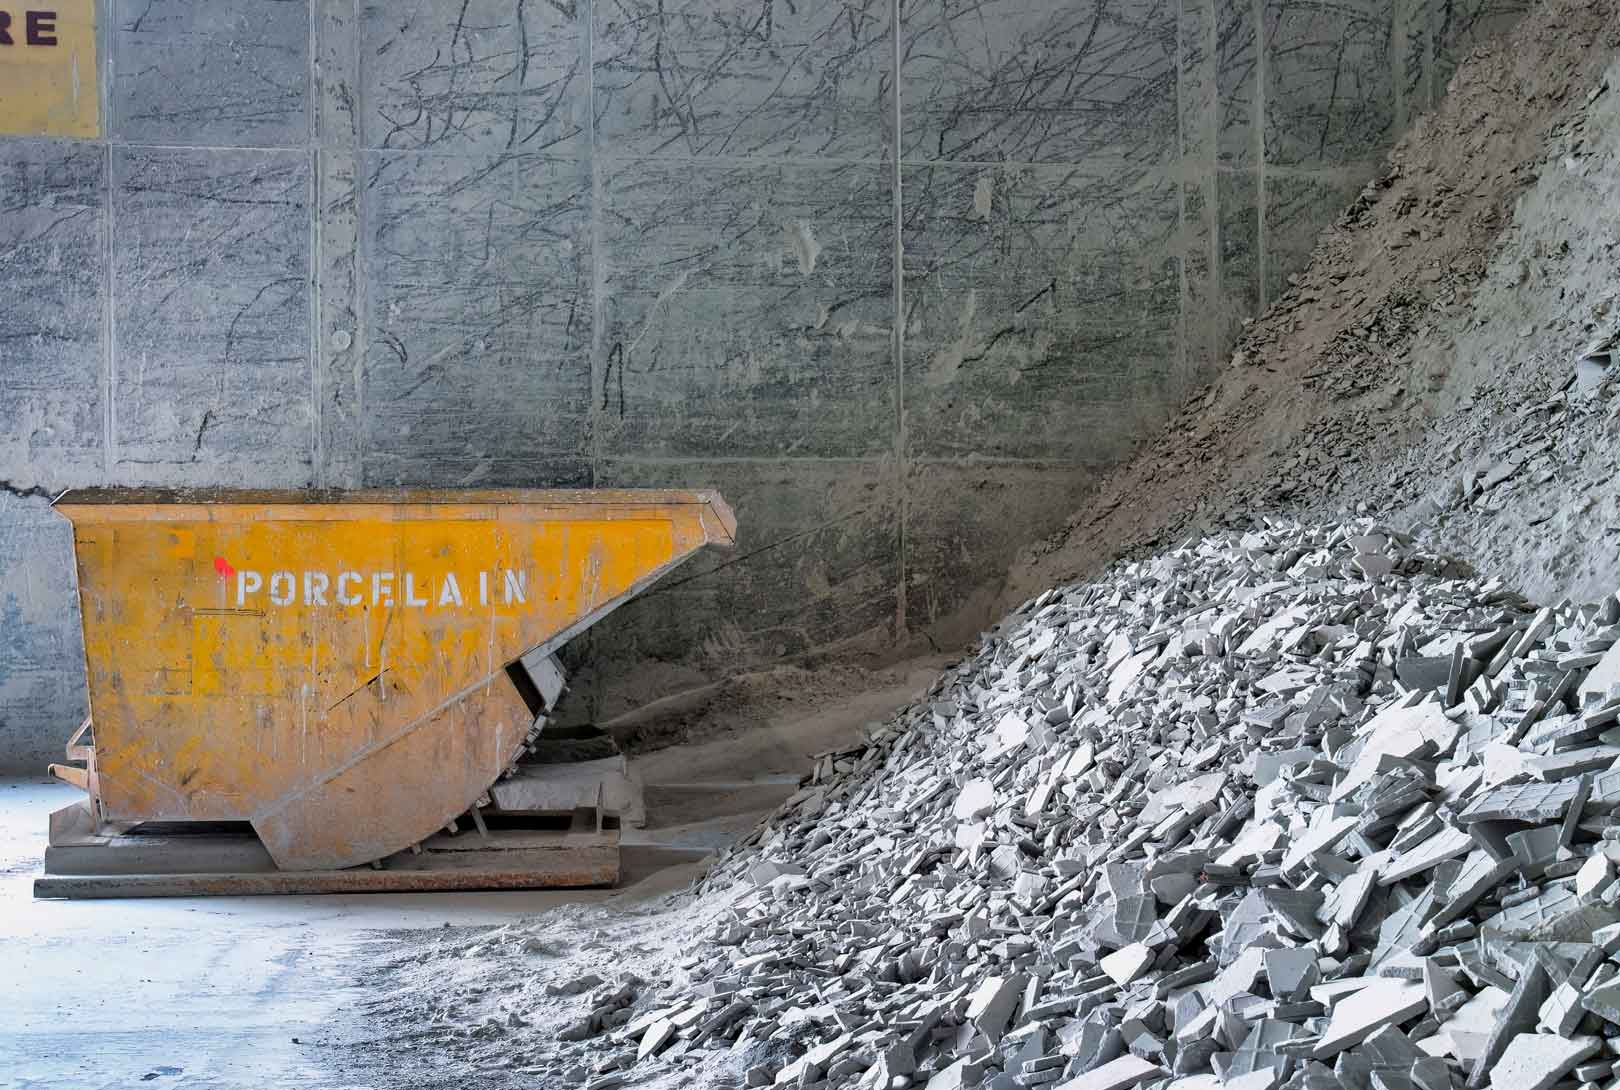 Porcelain Raw Materials Piled In A Factory Holding Area